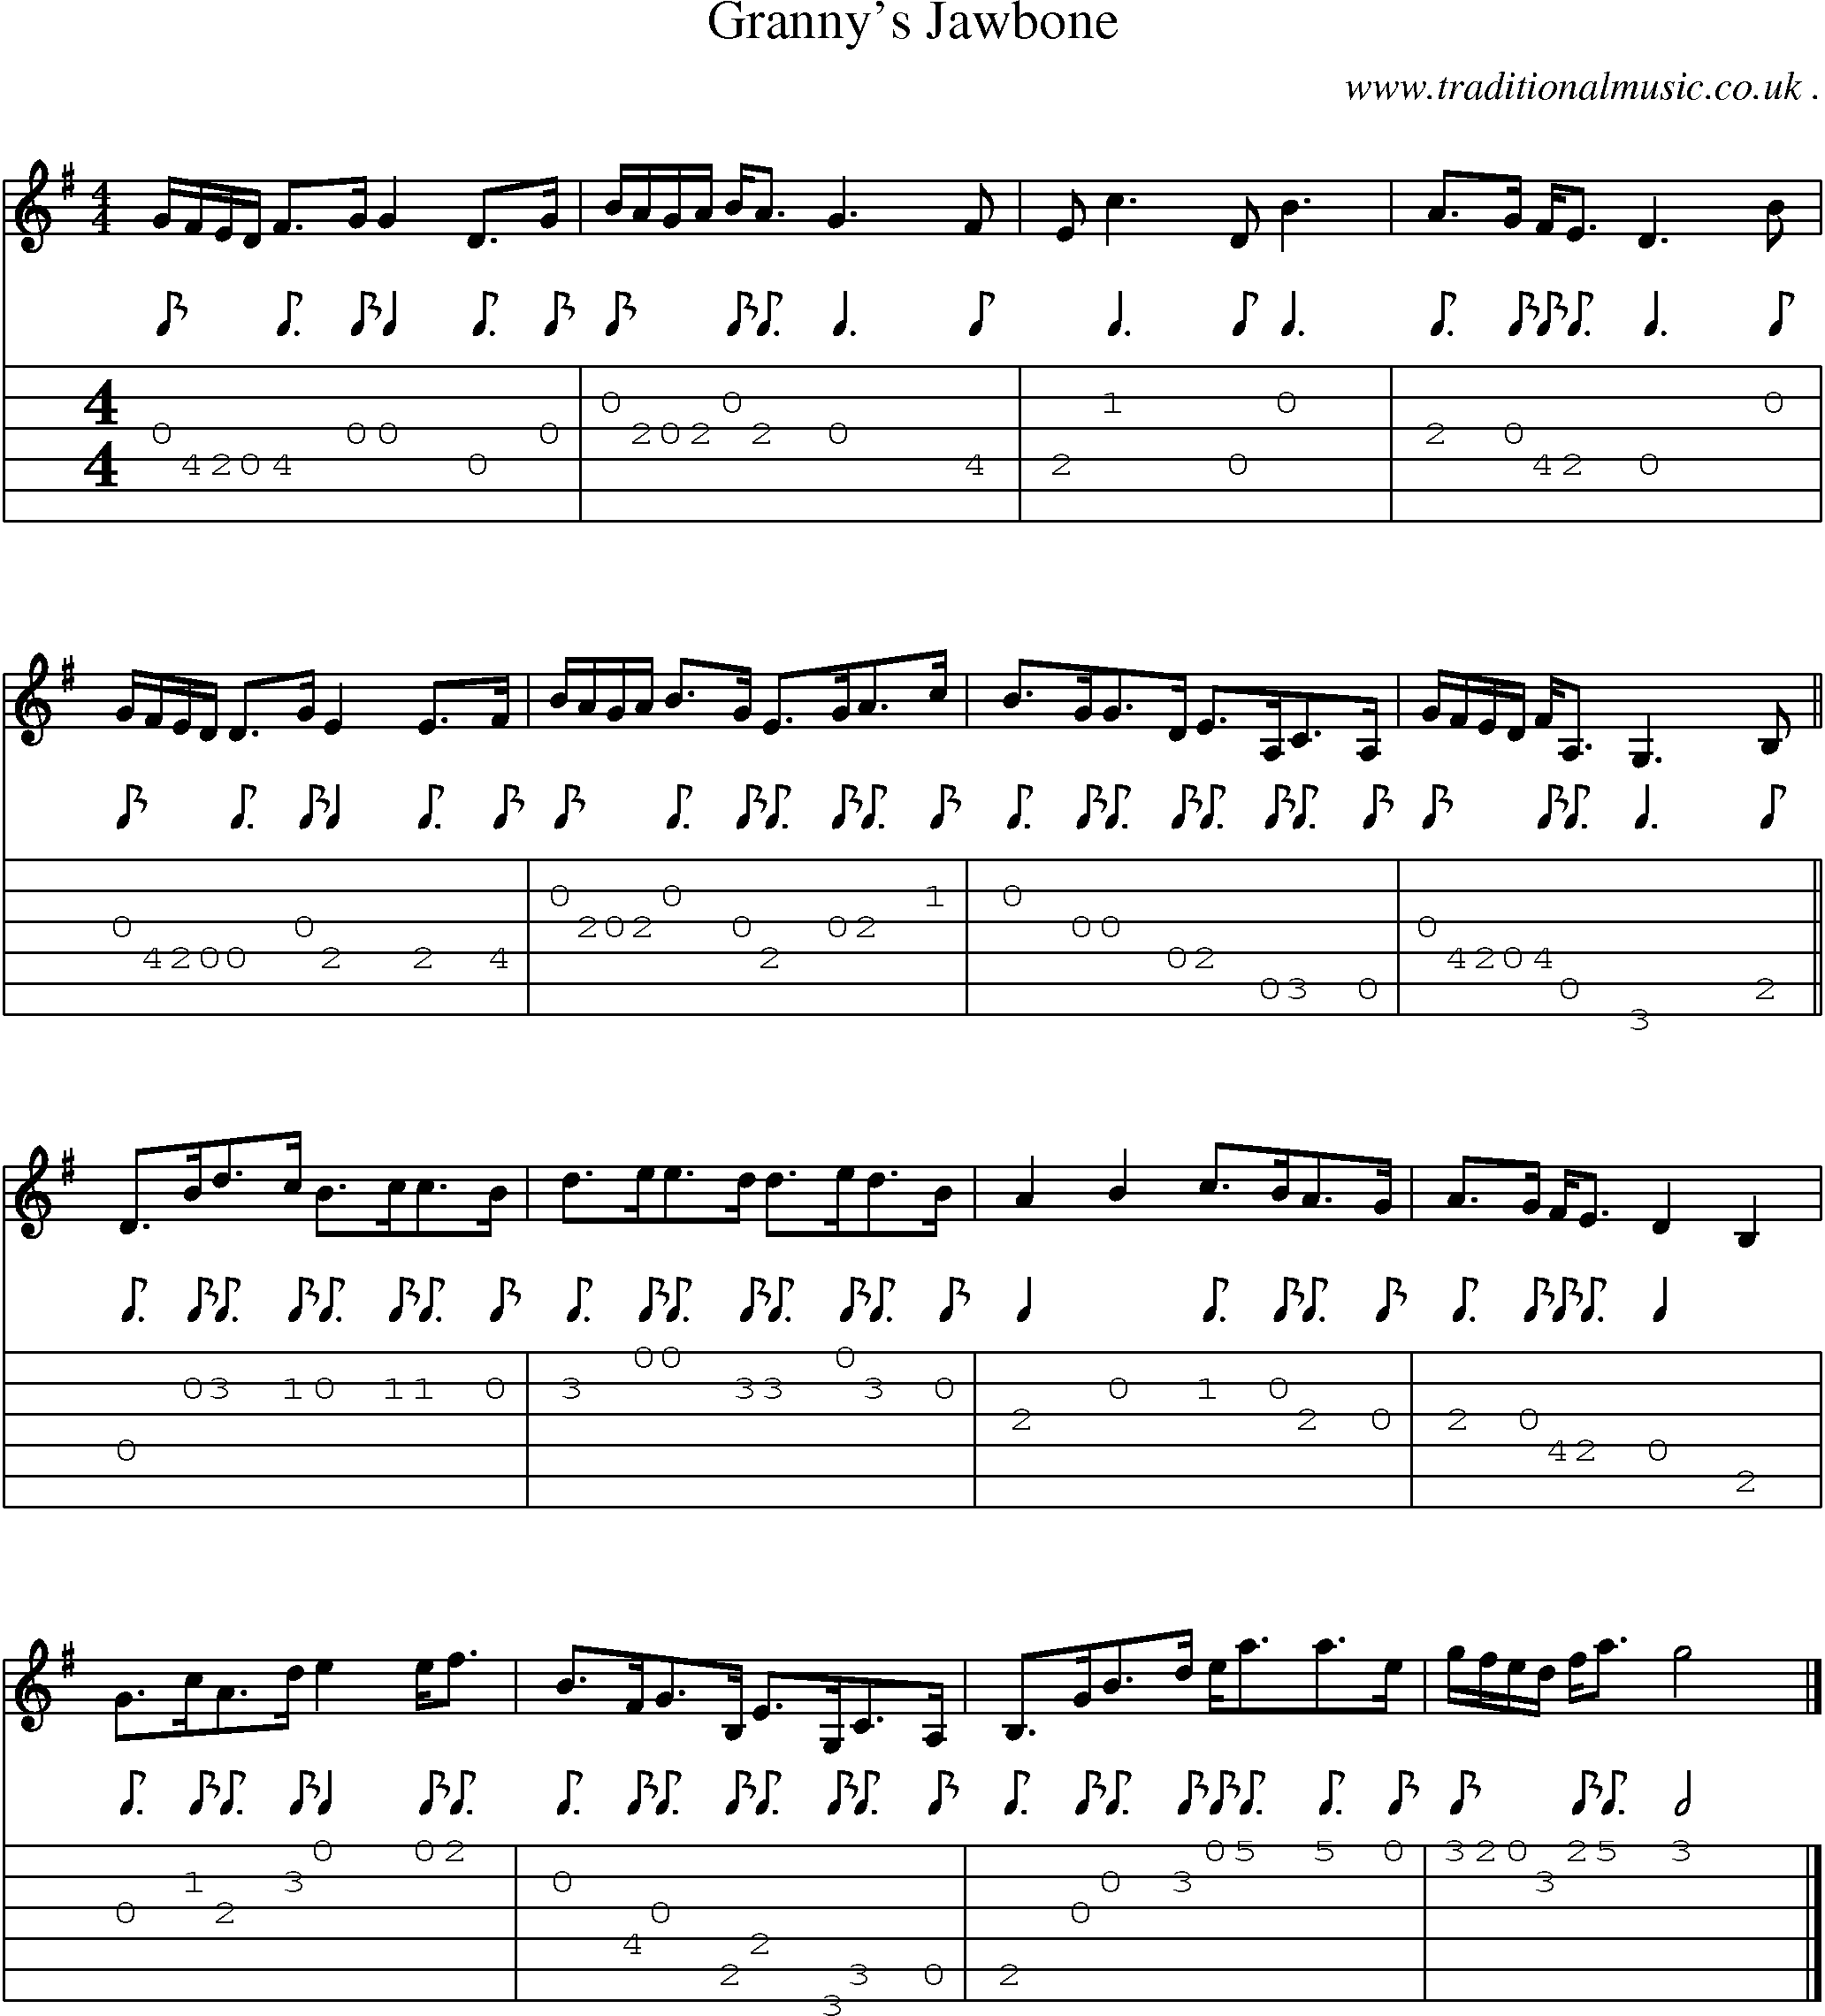 Sheet-music  score, Chords and Guitar Tabs for Grannys Jawbone